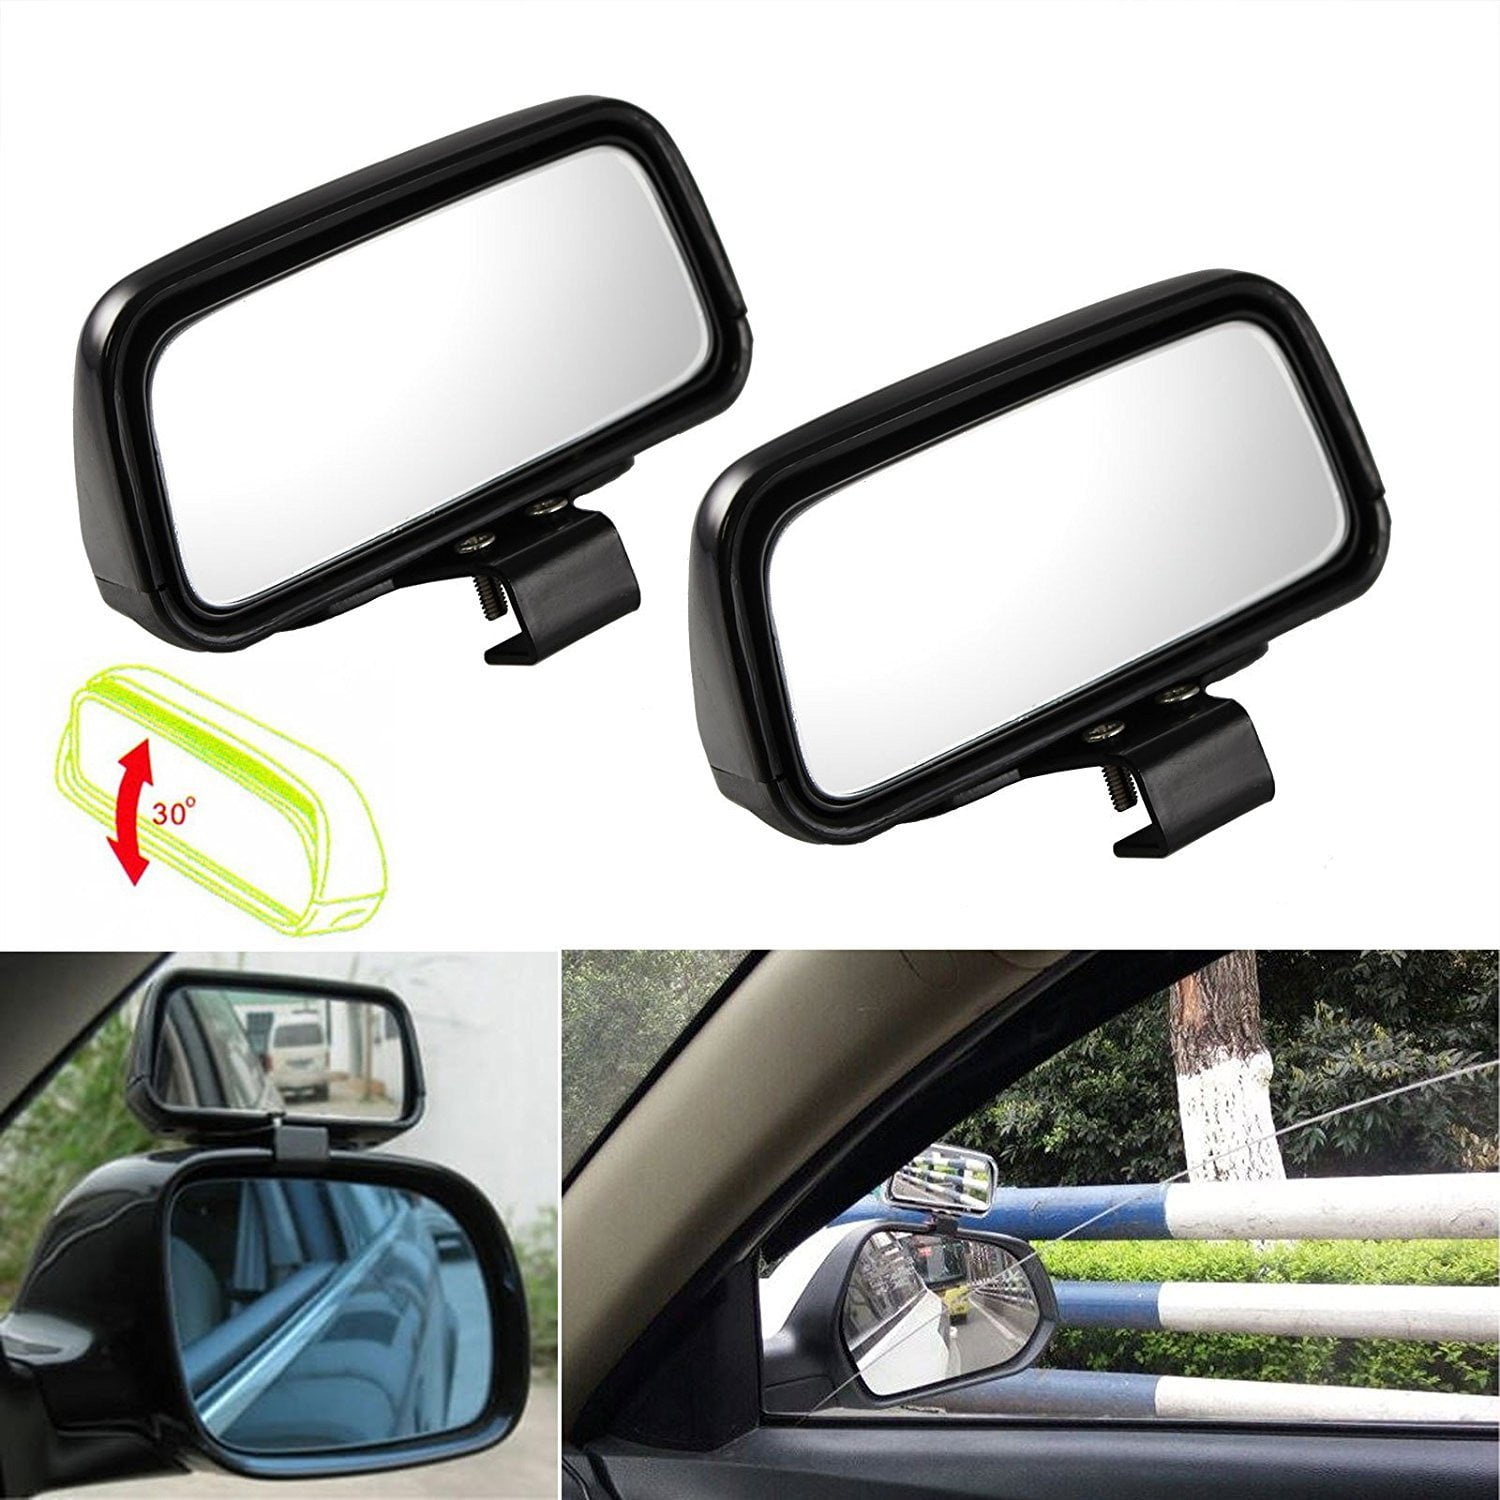 Real Glass Rear View Blind Mirrors Oval Convex and Self Stick - Larger Vehicles Trailers Bundle 4 Pieces Rust Resistant Aluminum SUVs 4 Pack 3 Blind Spot Mirrors For Trucks 